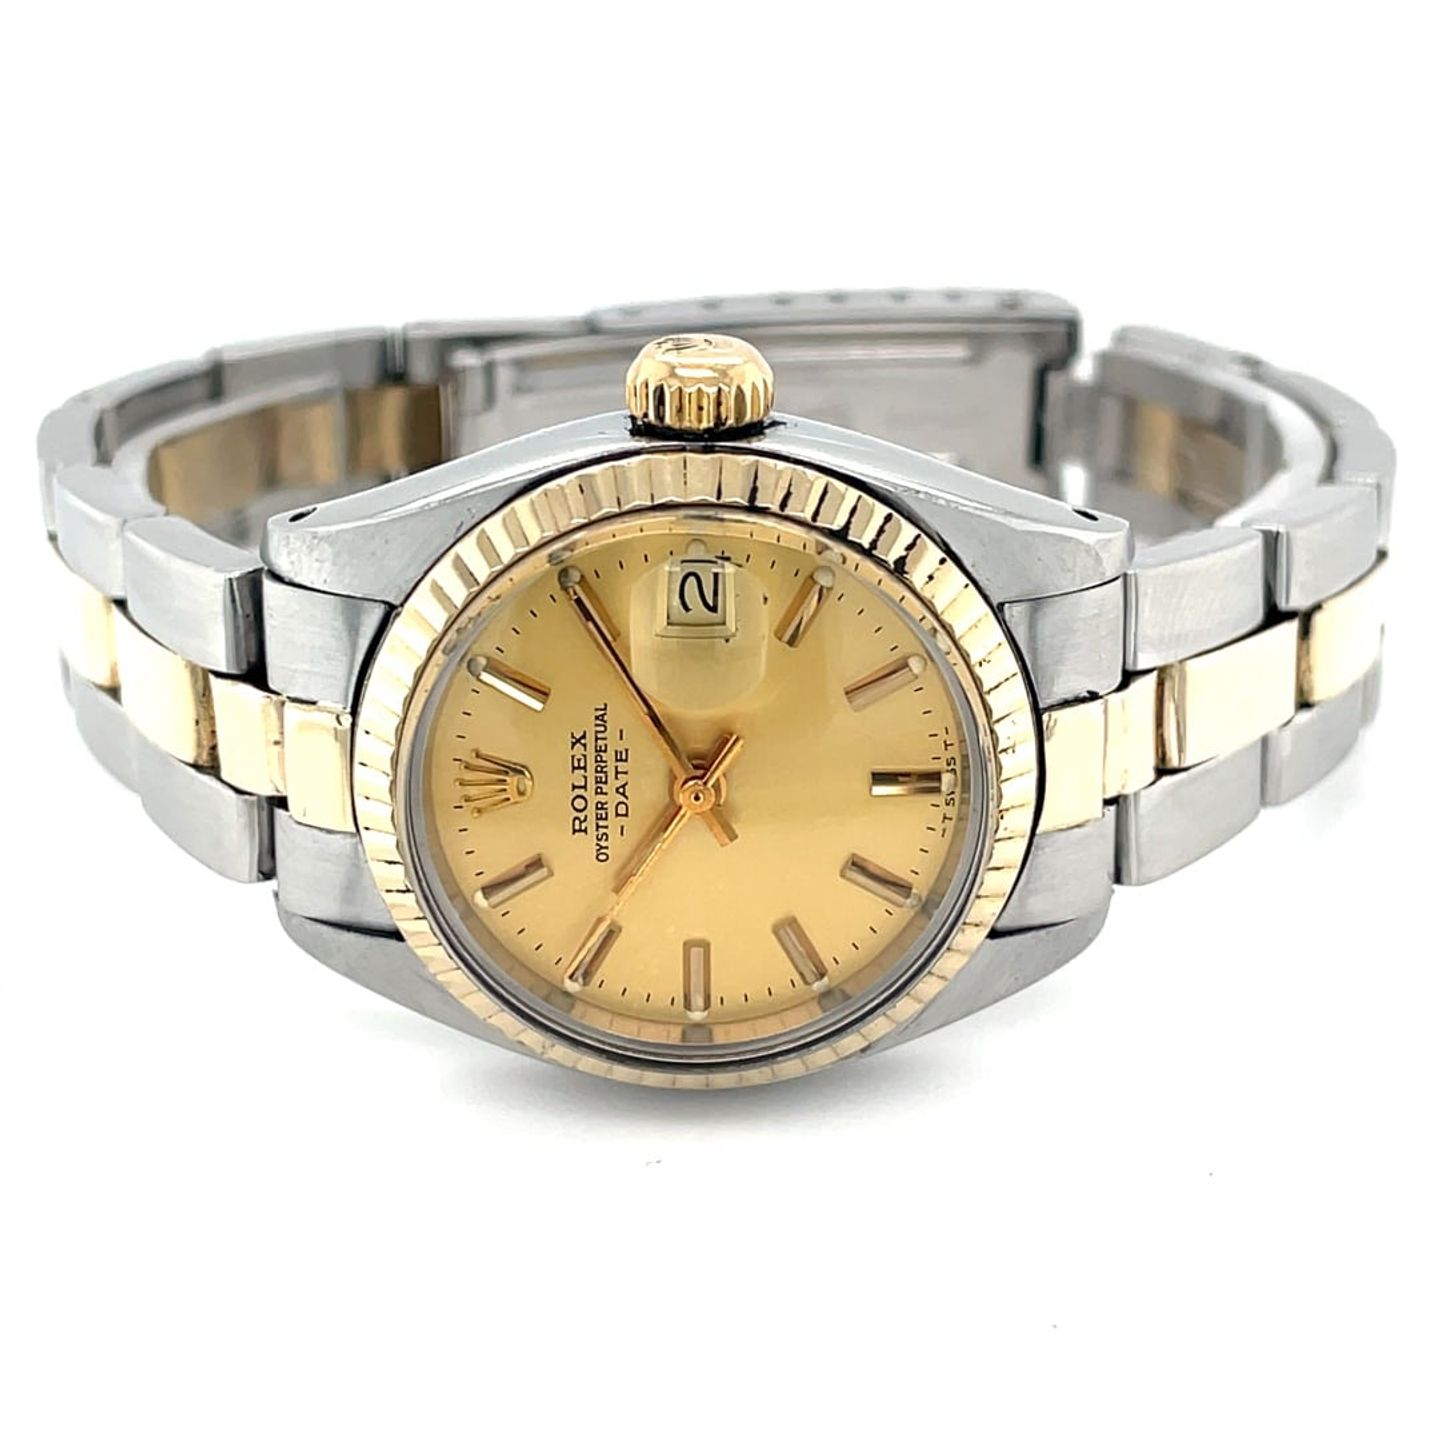 Rolex Oyster Perpetual Lady Date 6517 (1969) - Champagne wijzerplaat 26mm Goud/Staal (1/8)